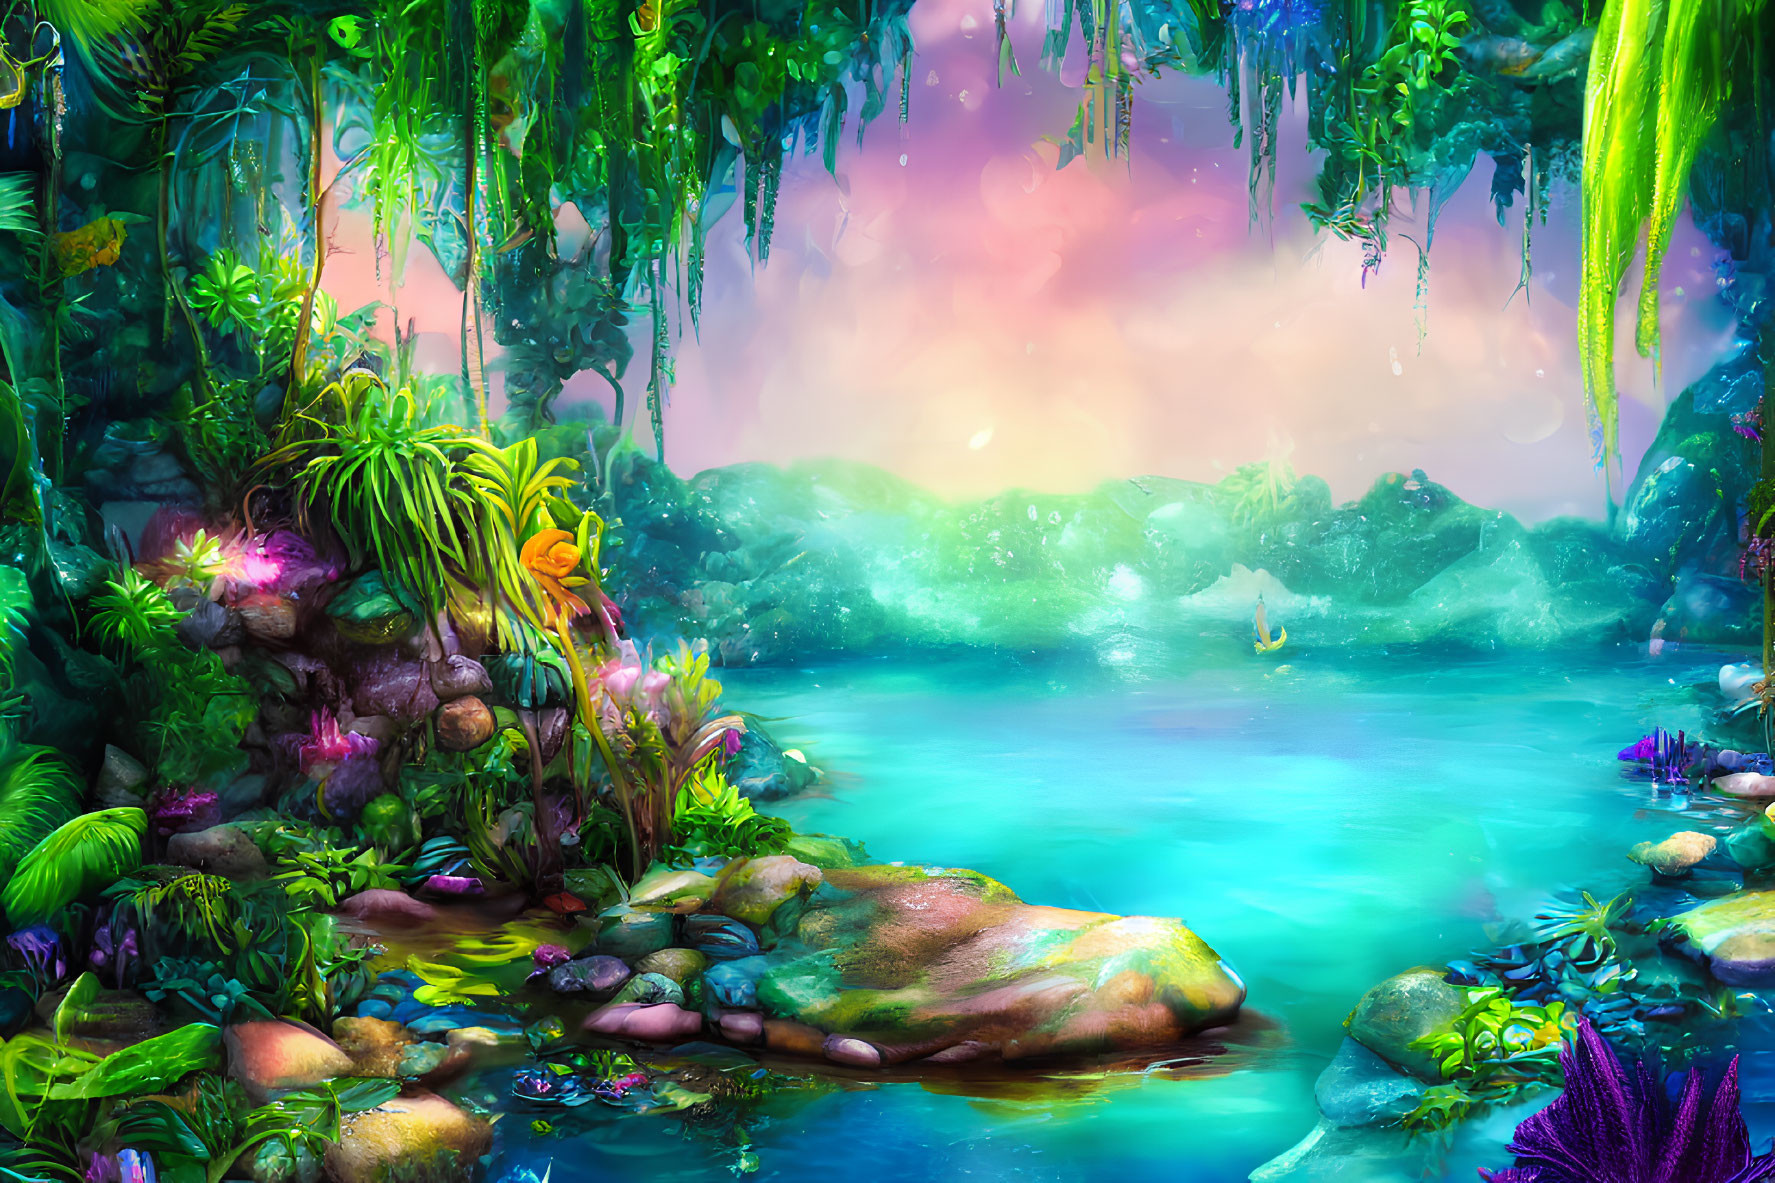 Colorful Fantasy Landscape with Luminous River & Misty Mountains